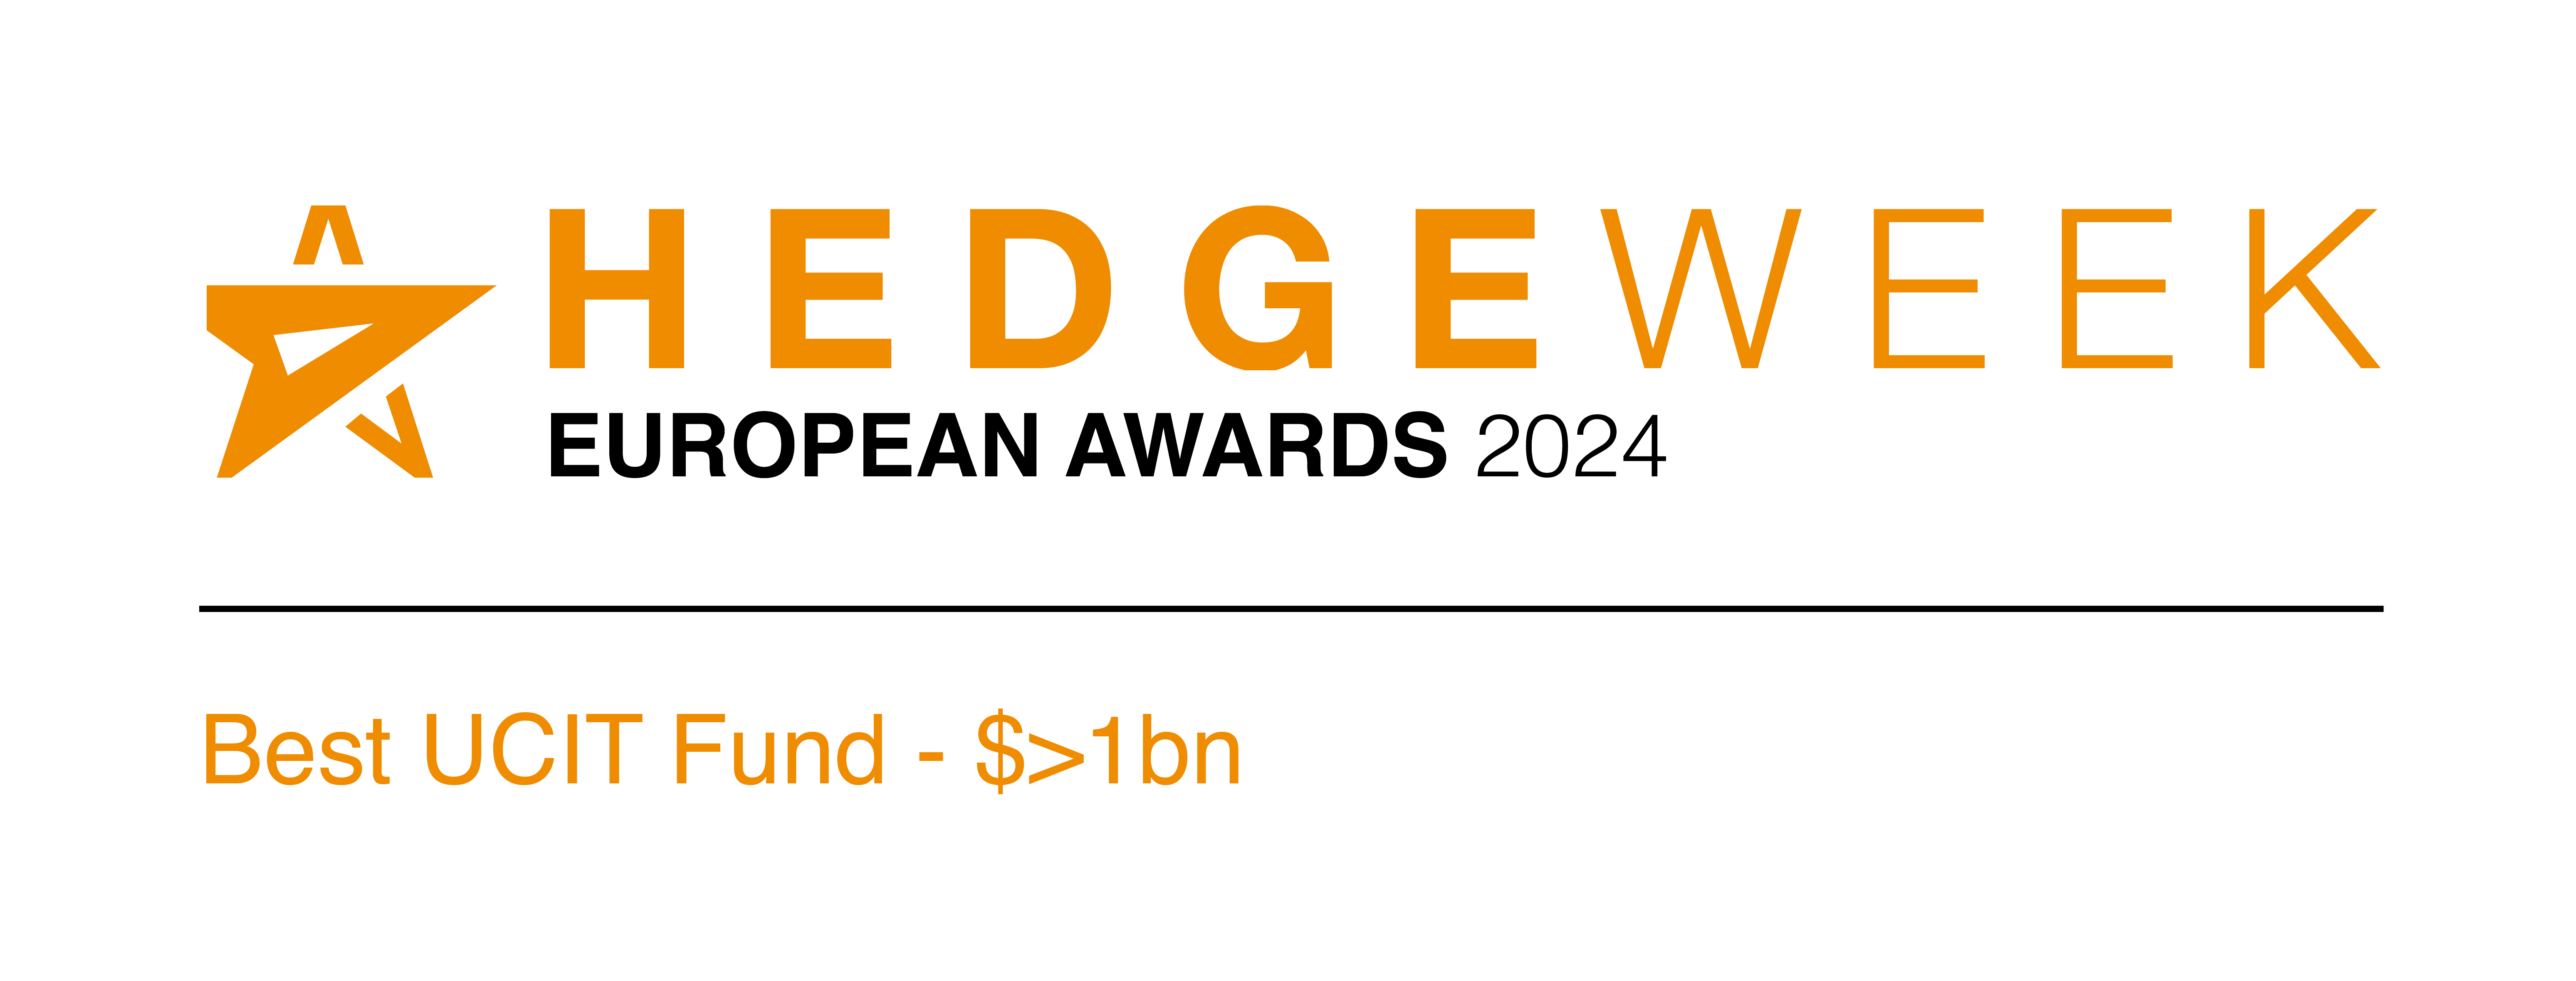 Jupiter Merian Global Equity Absolute Return has received the award for “BEST UCITS fund over $1bn” at the Hedgeweek European Awards 2024.